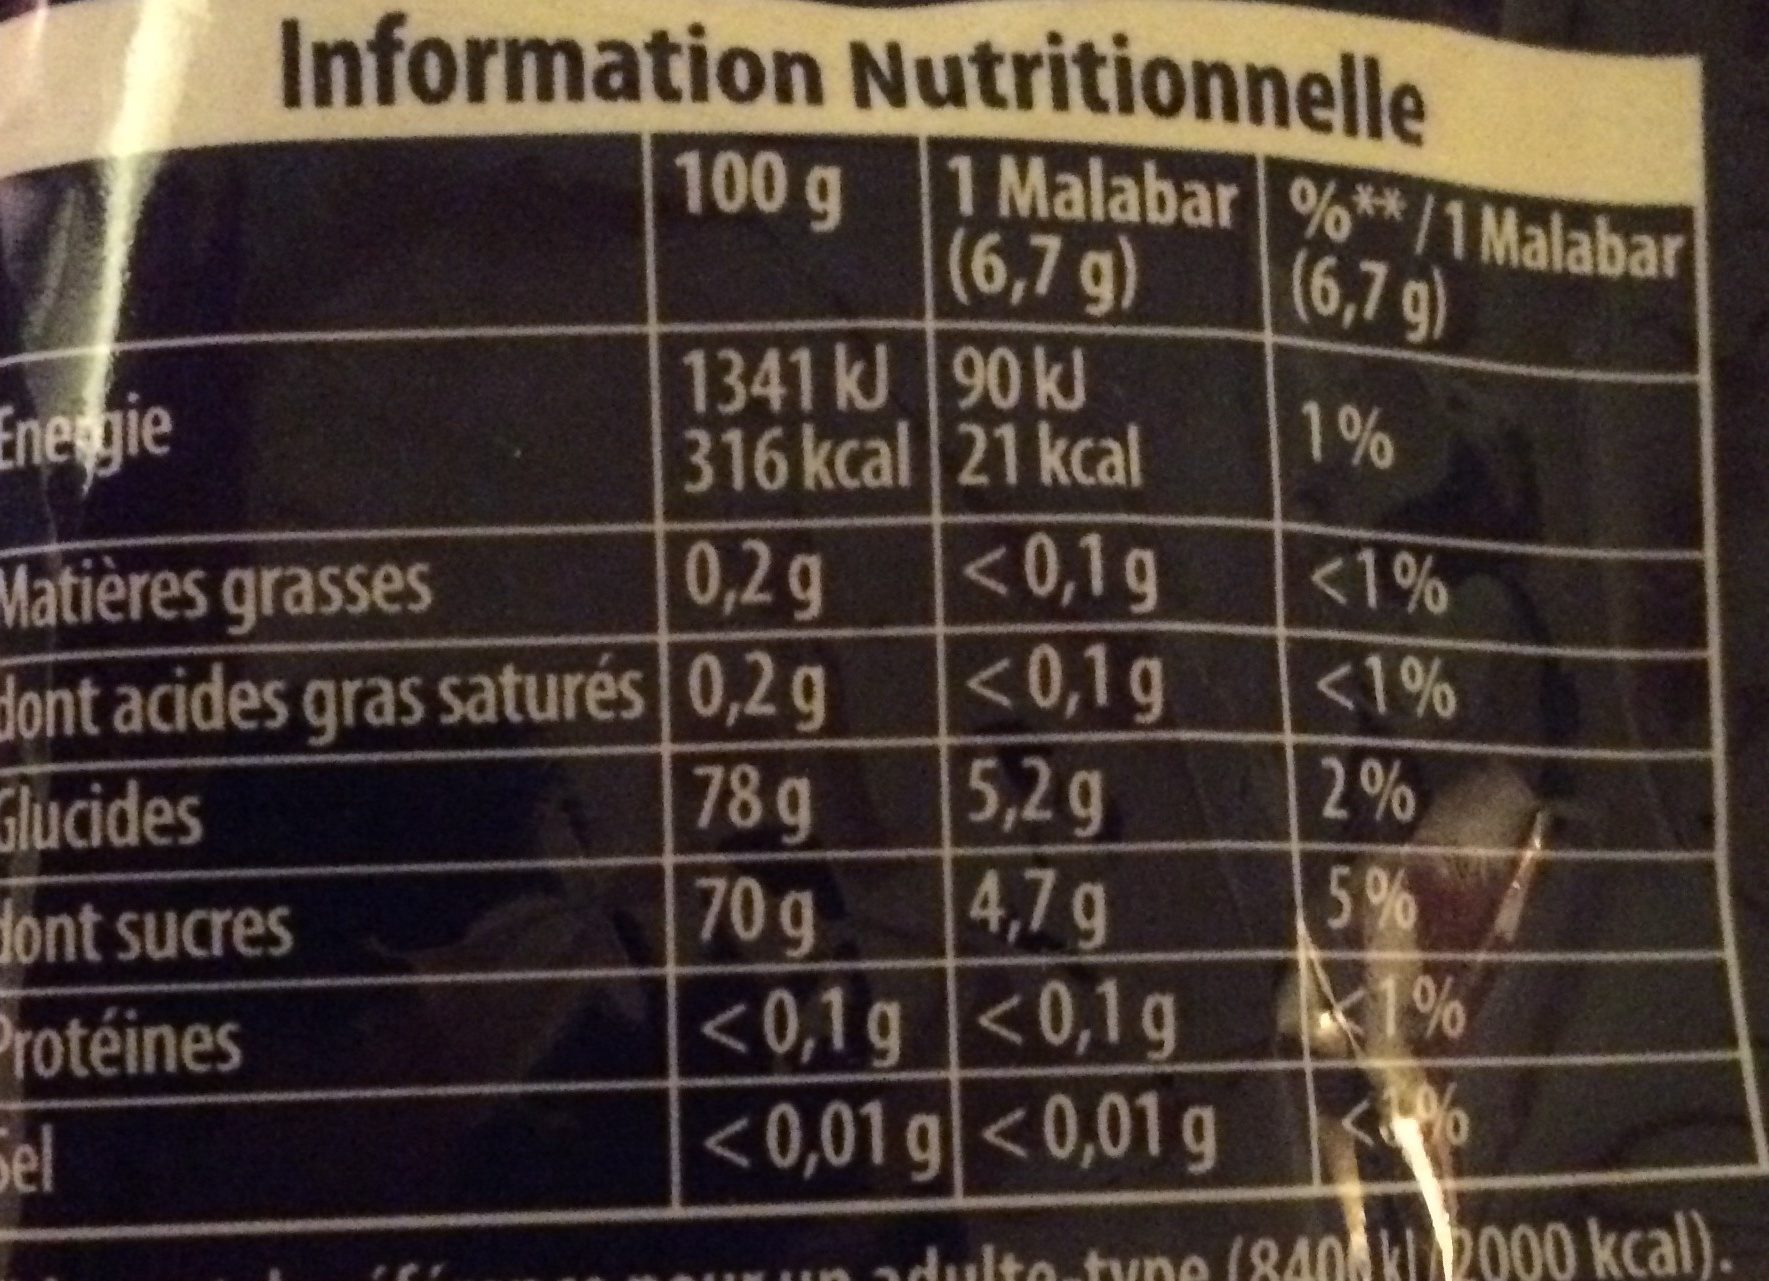 Malabar bubble mix - Nutrition facts - fr